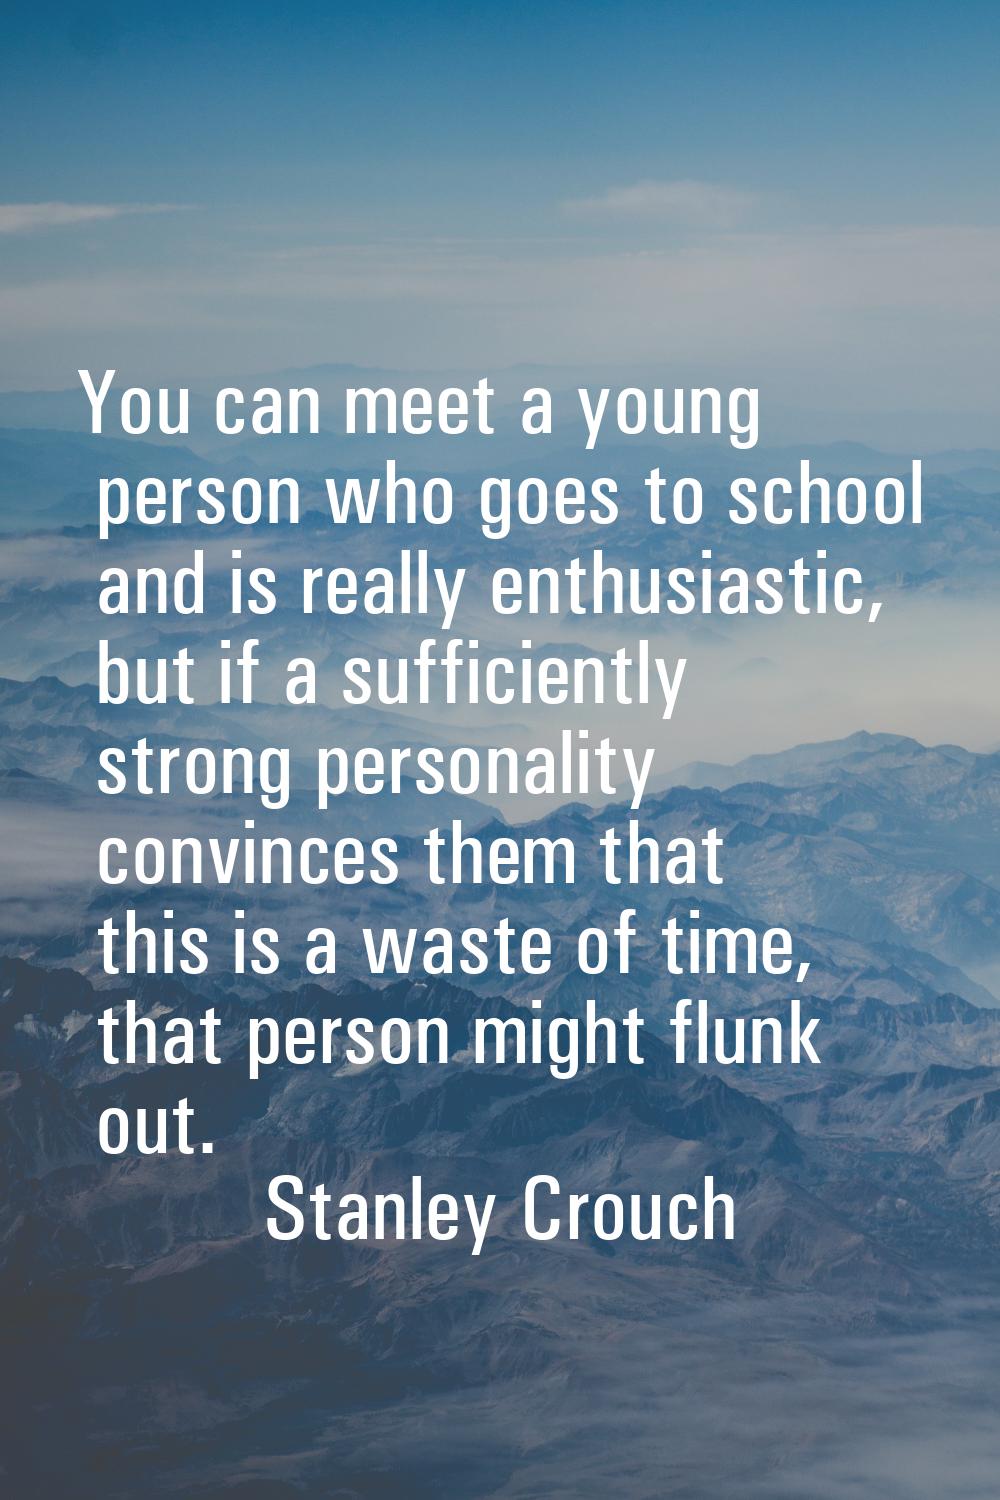 You can meet a young person who goes to school and is really enthusiastic, but if a sufficiently st